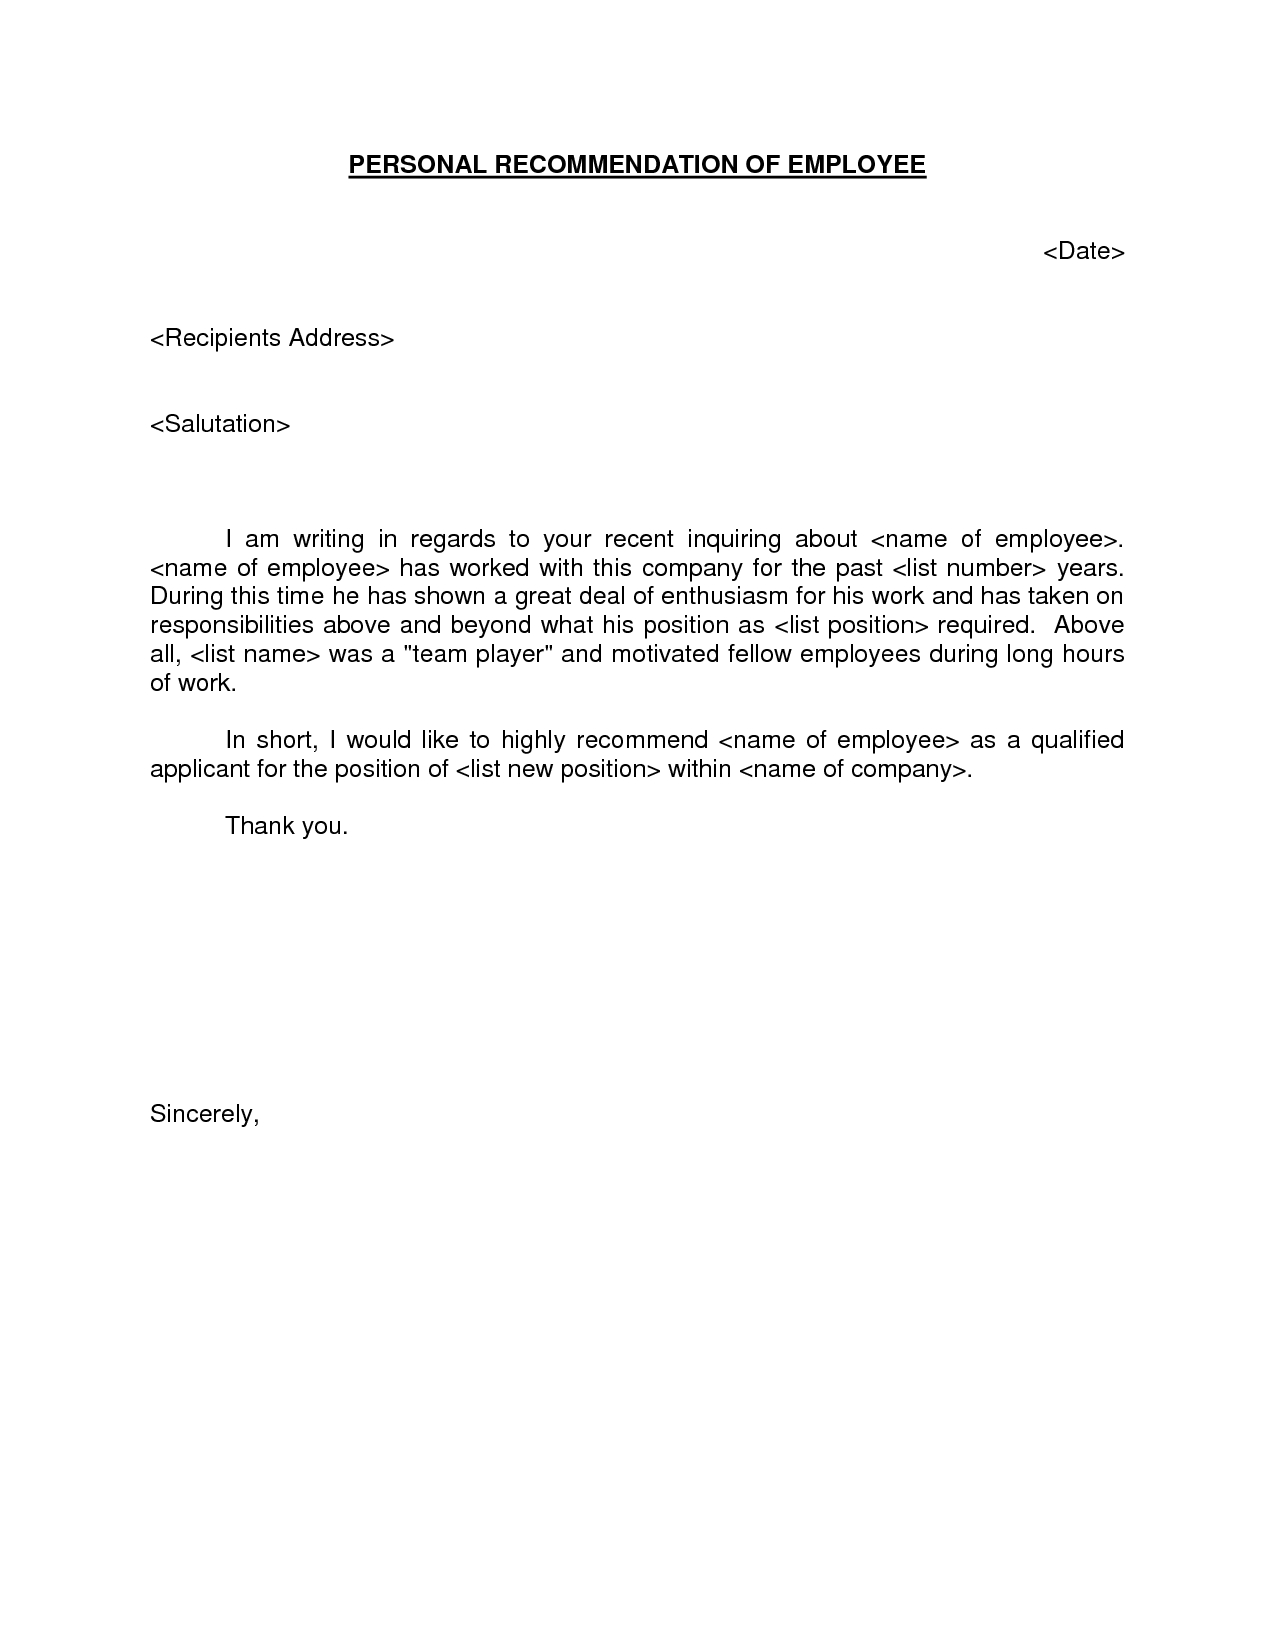 Sample Recommendation Letter For Regularization Of Employee